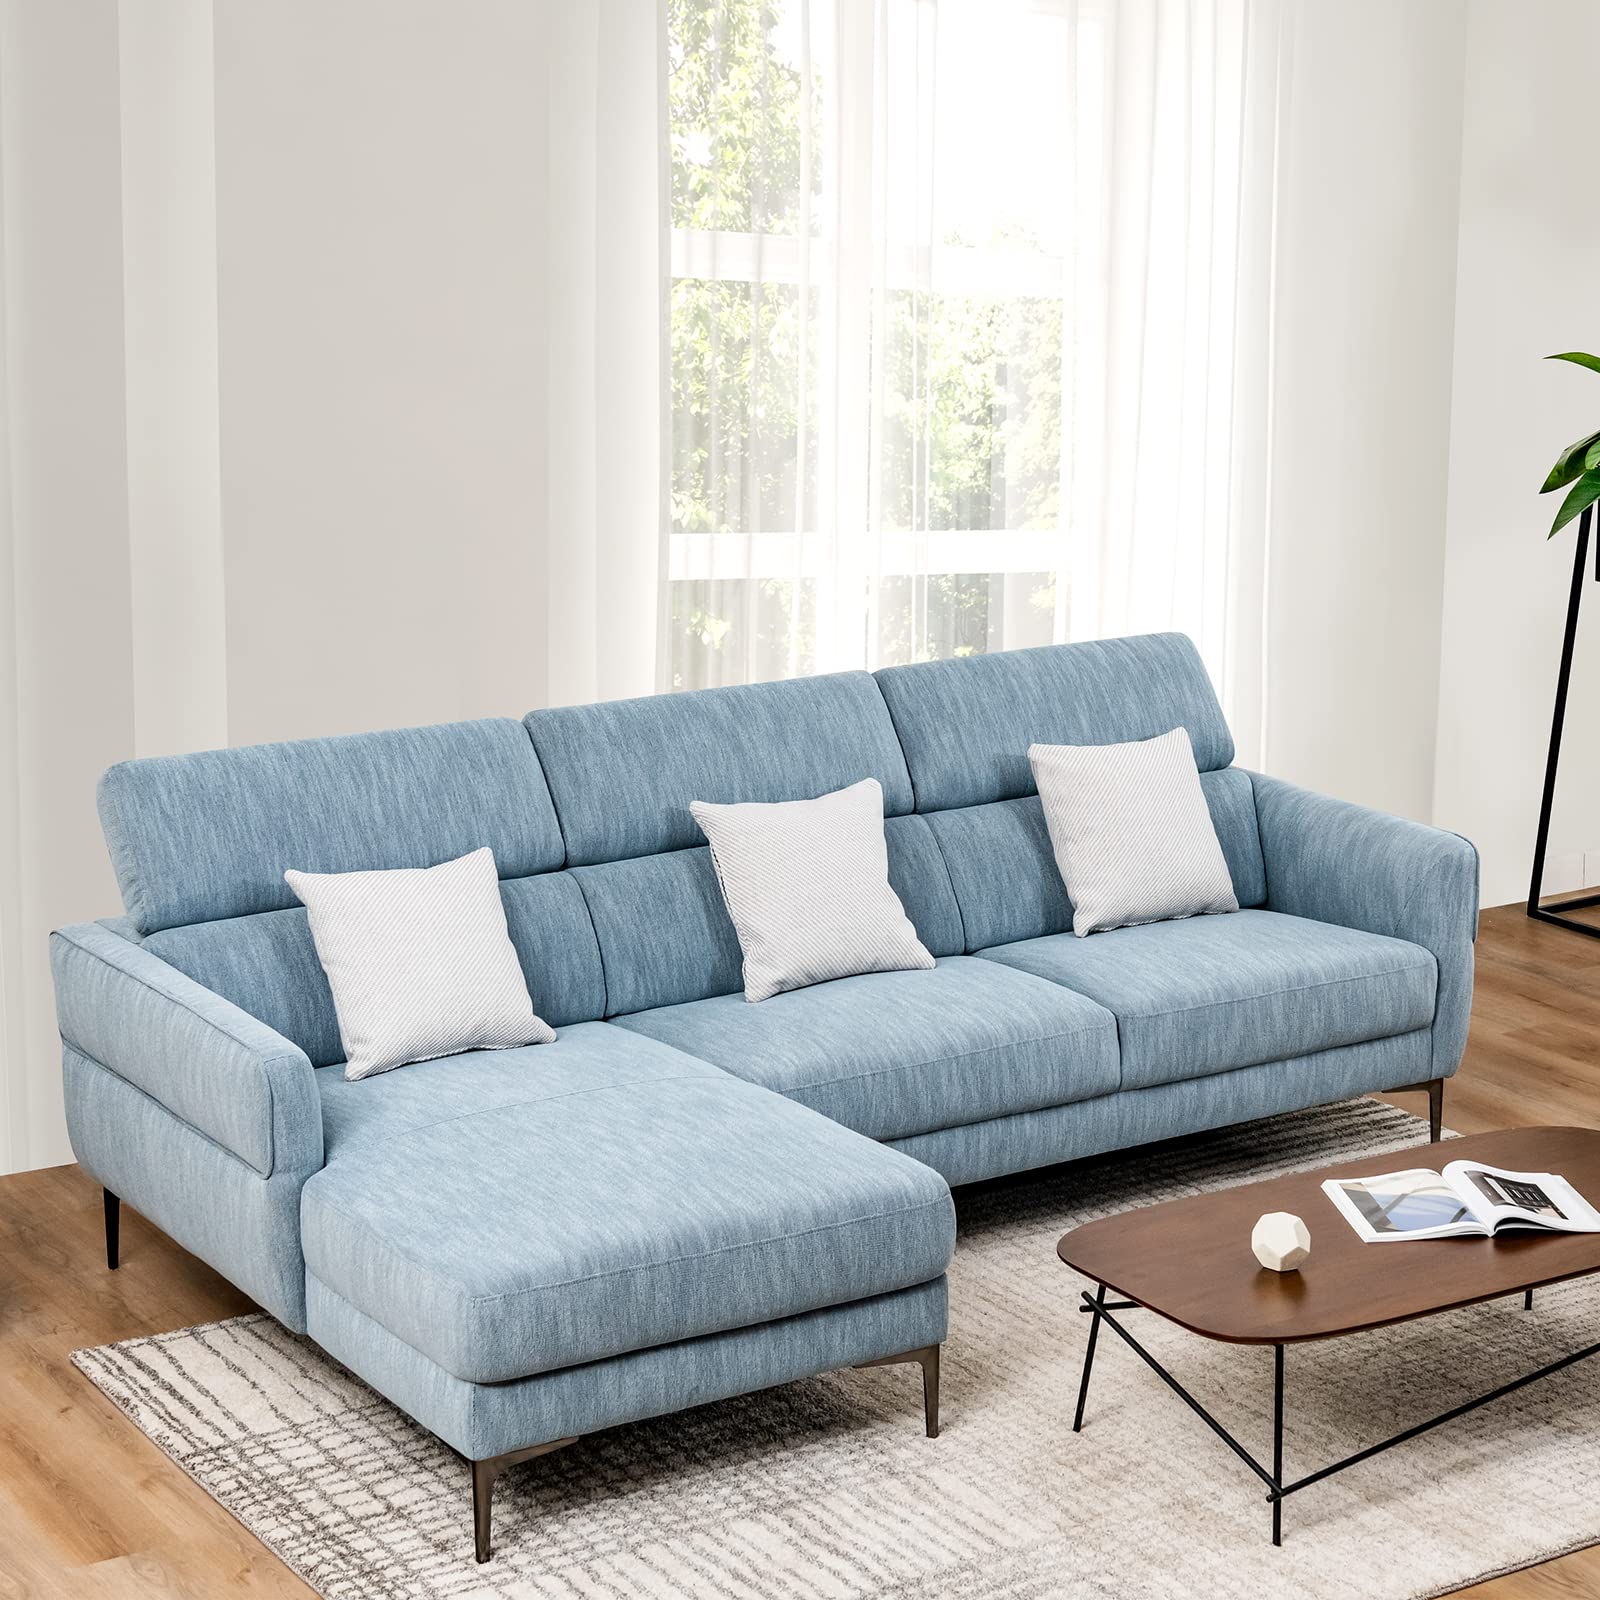 Giantex L-Shaped Sofa Couch, 3-Seat Upholstered Sofa with Wide Chaise Lounge, Adjustable Headrest, Blue